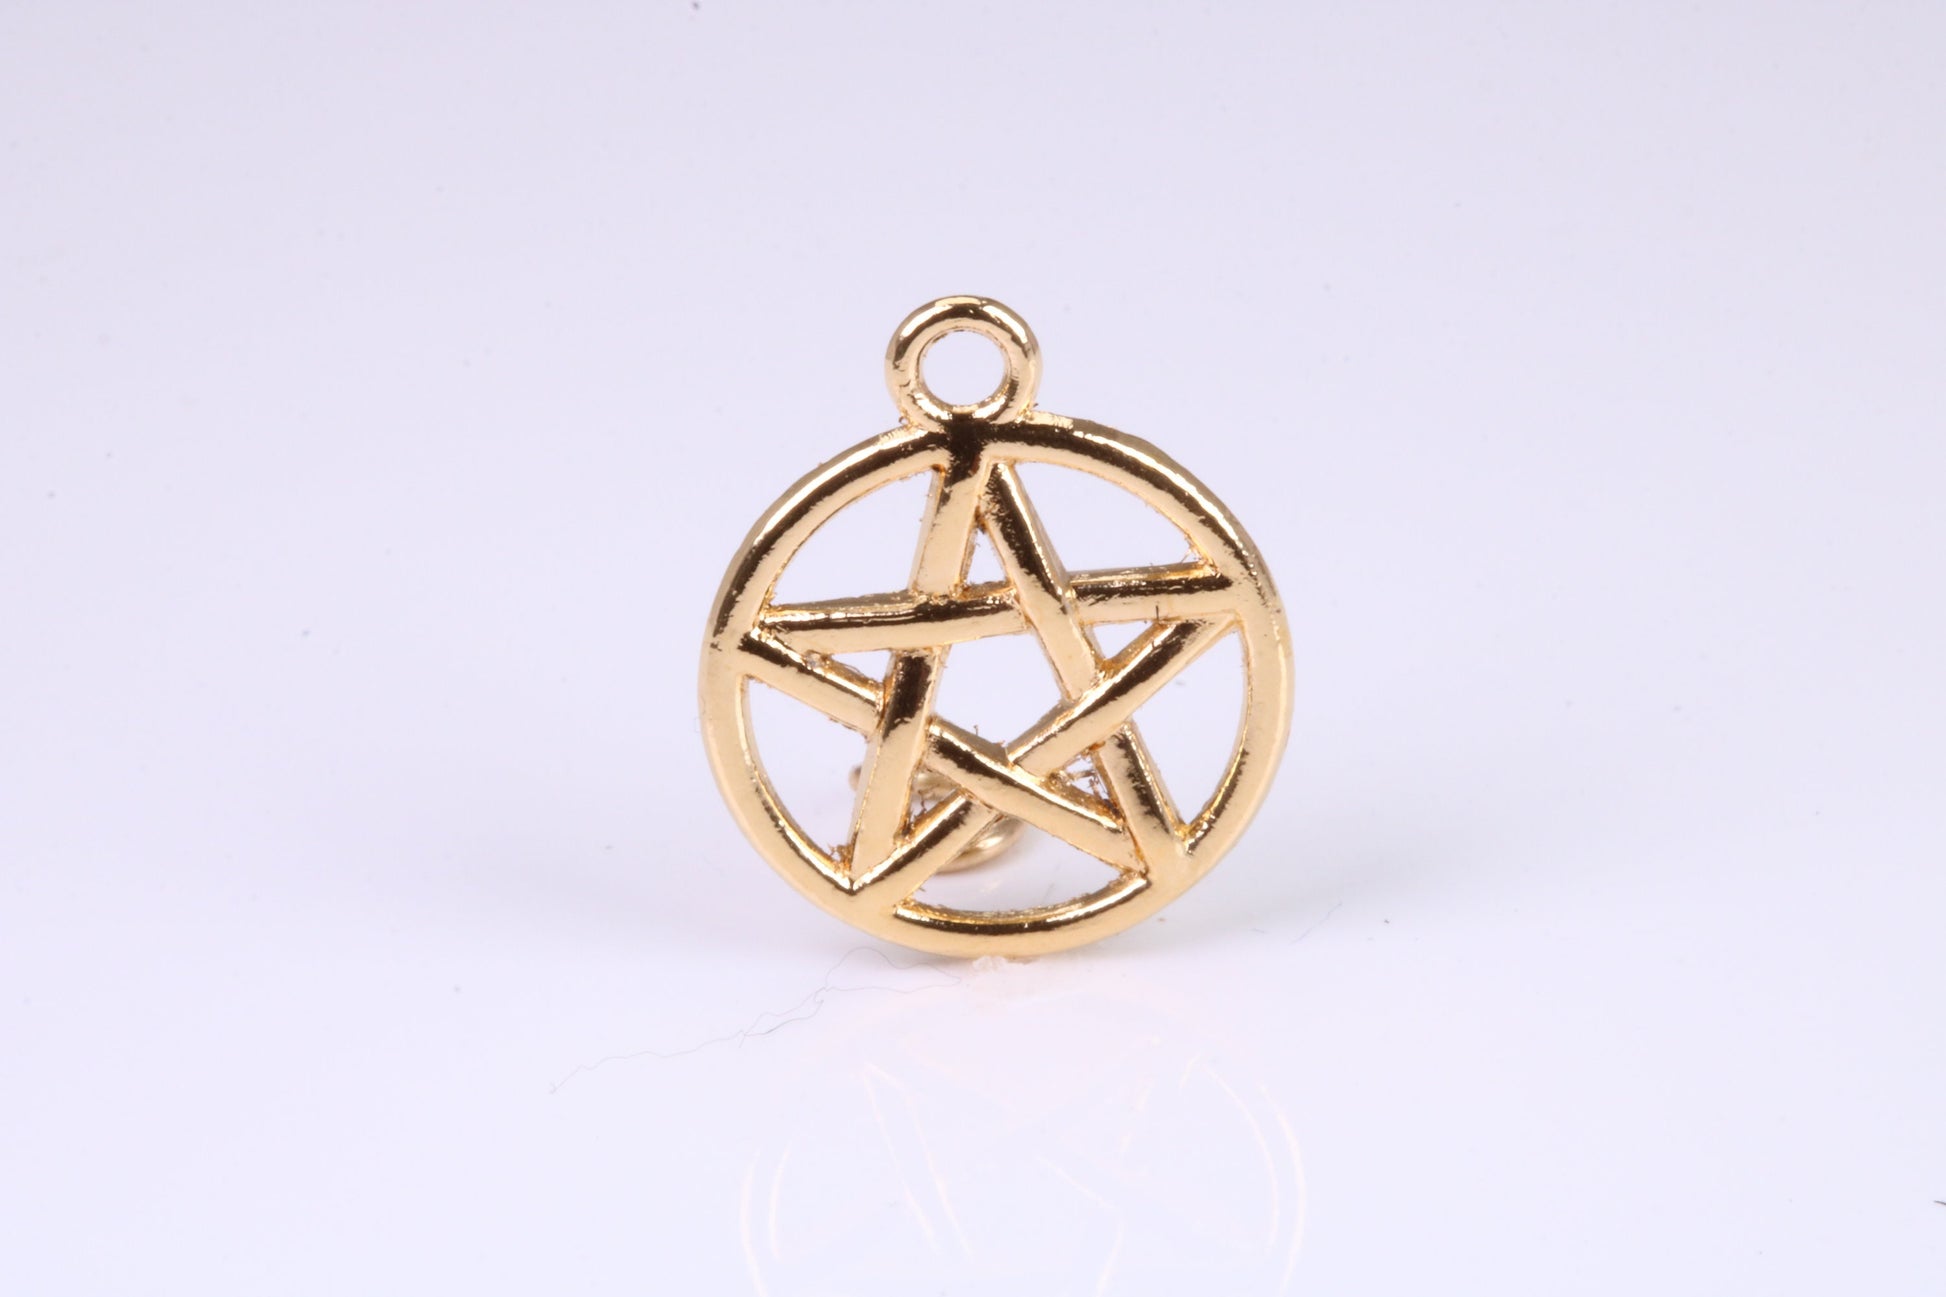 Pentagram Charm, Made from solid Yellow Gold, British Hallmarked